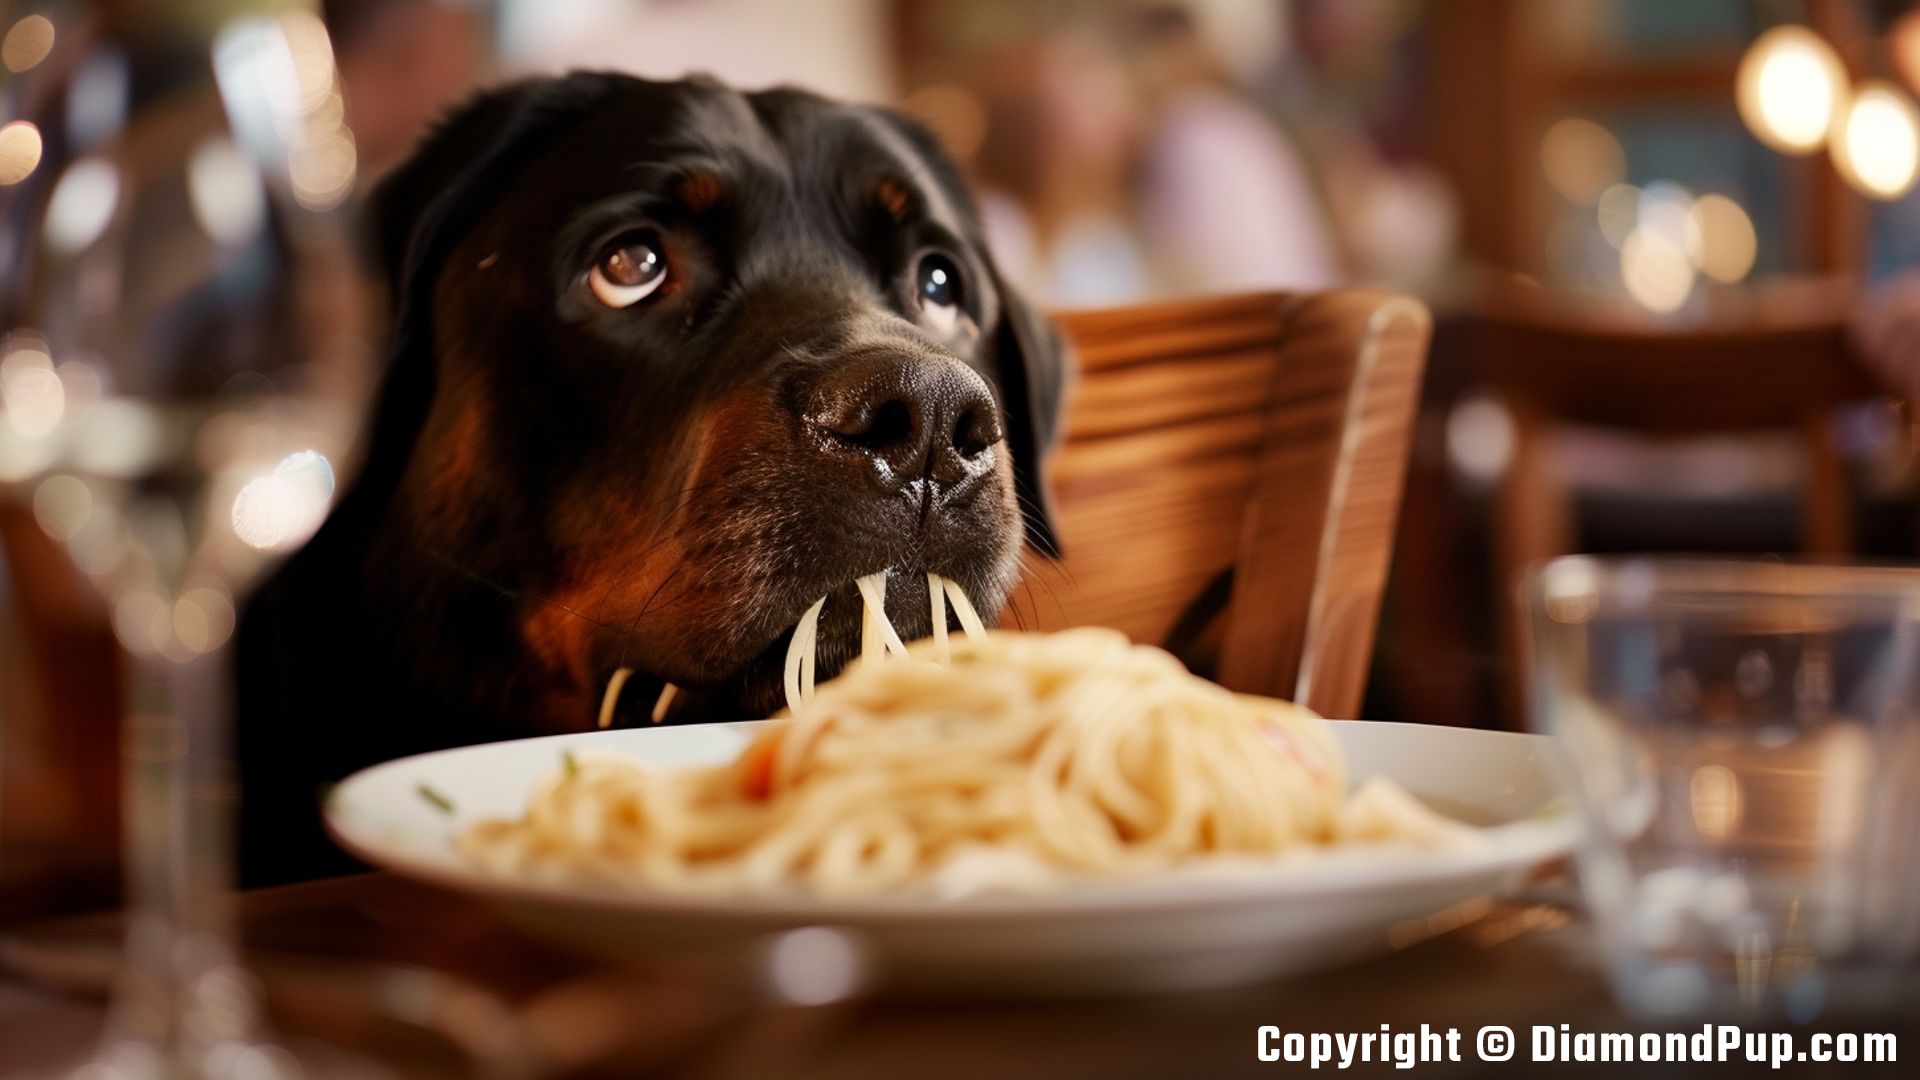 Image of Rottweiler Snacking on Pasta